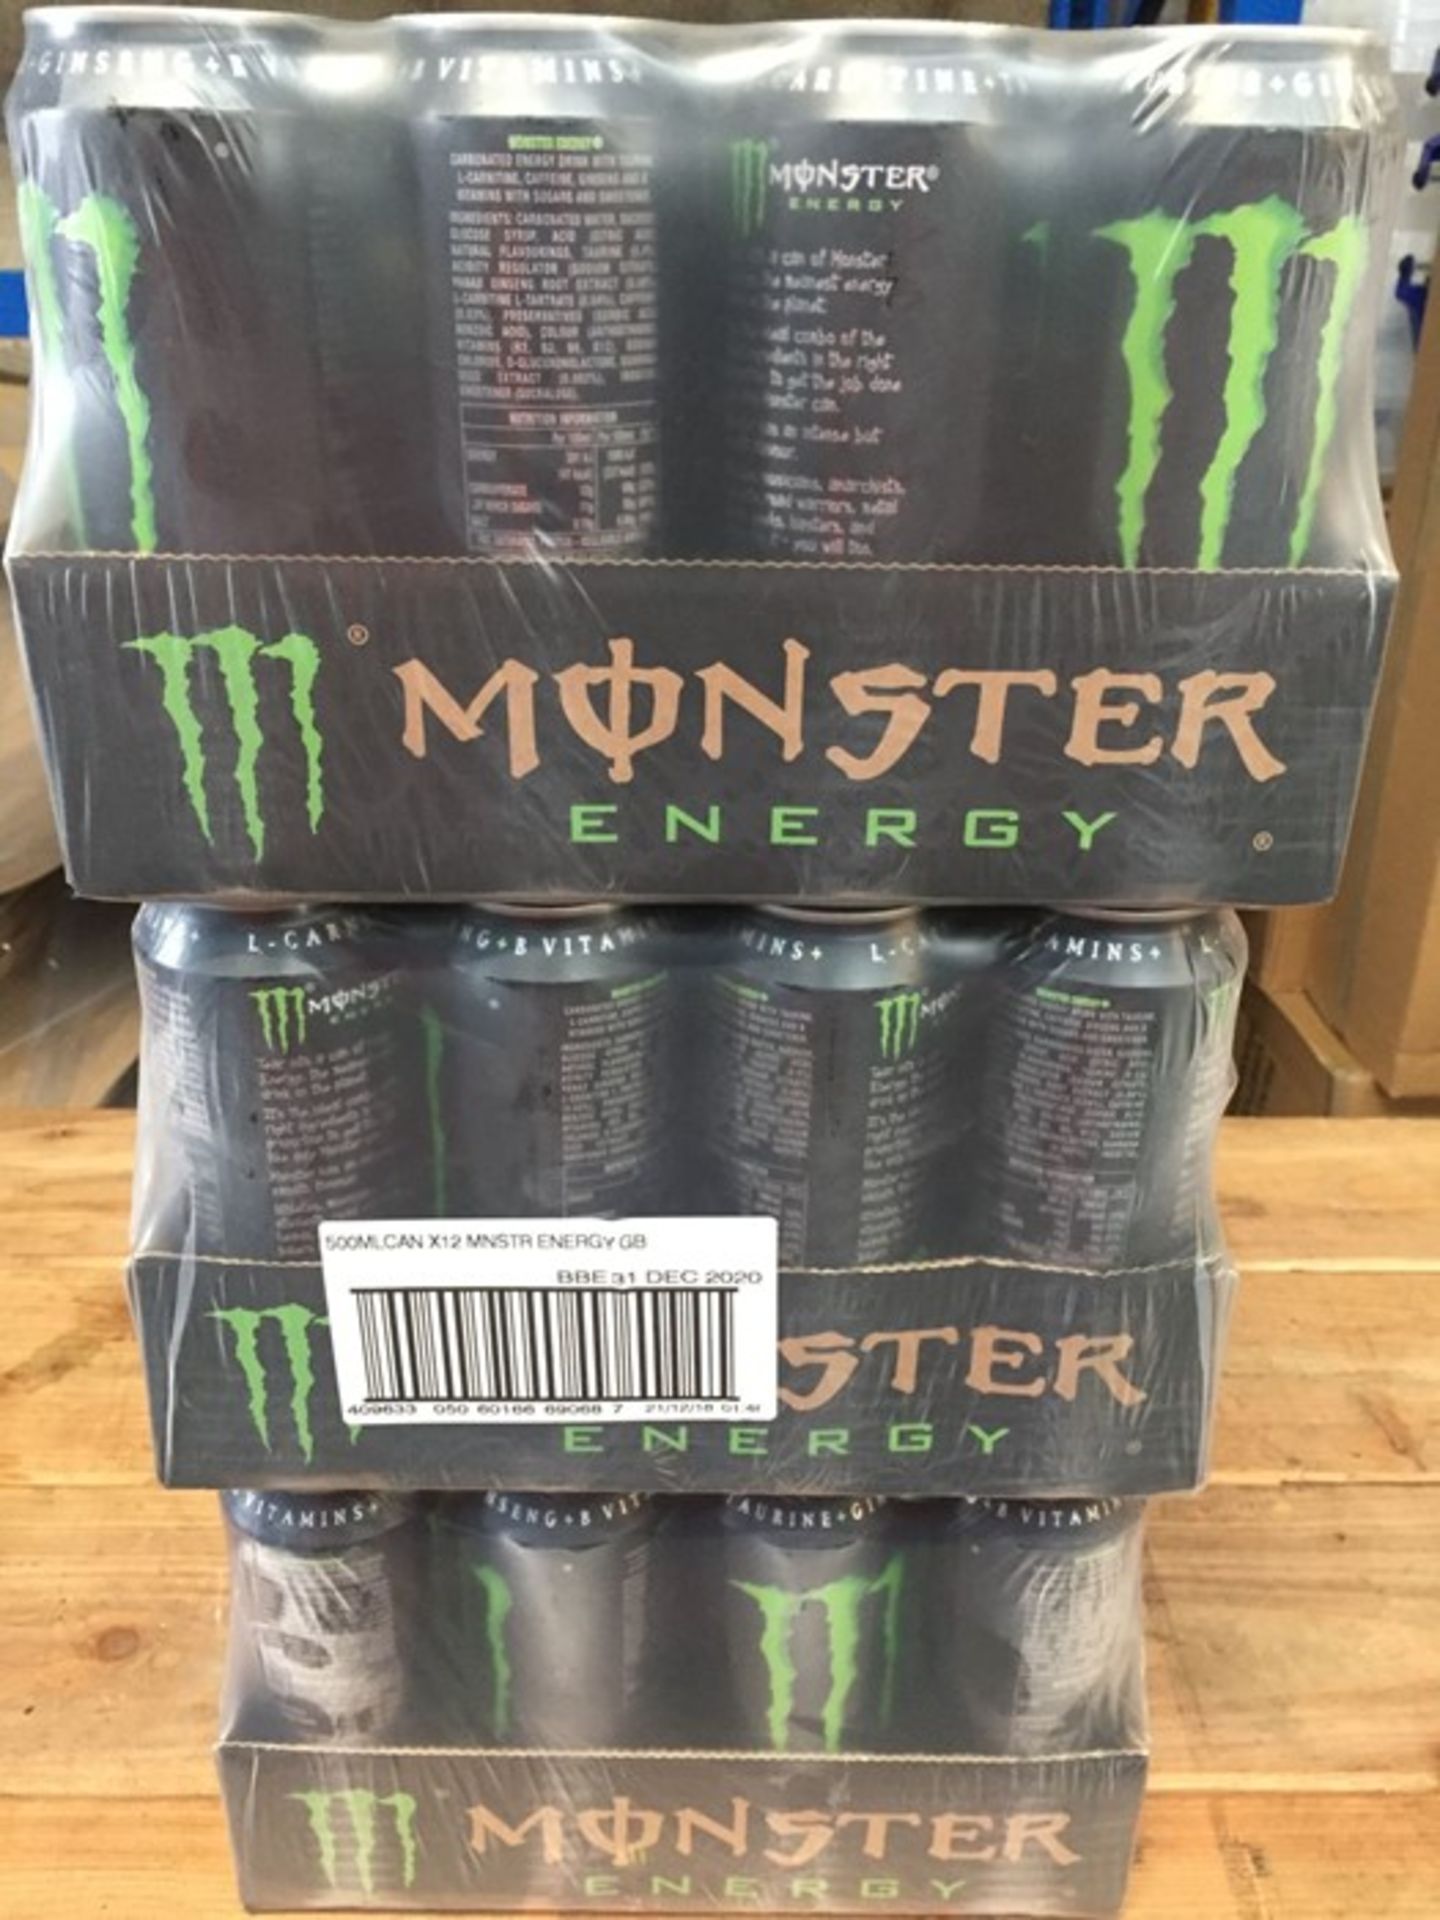 1 LOT TO CONTAIN 3 PACKS OF 12 X 500ML CANS OF MONSTER ENERGY BB 31 DEC 2020, 36 CANS IN TOTAL FOR